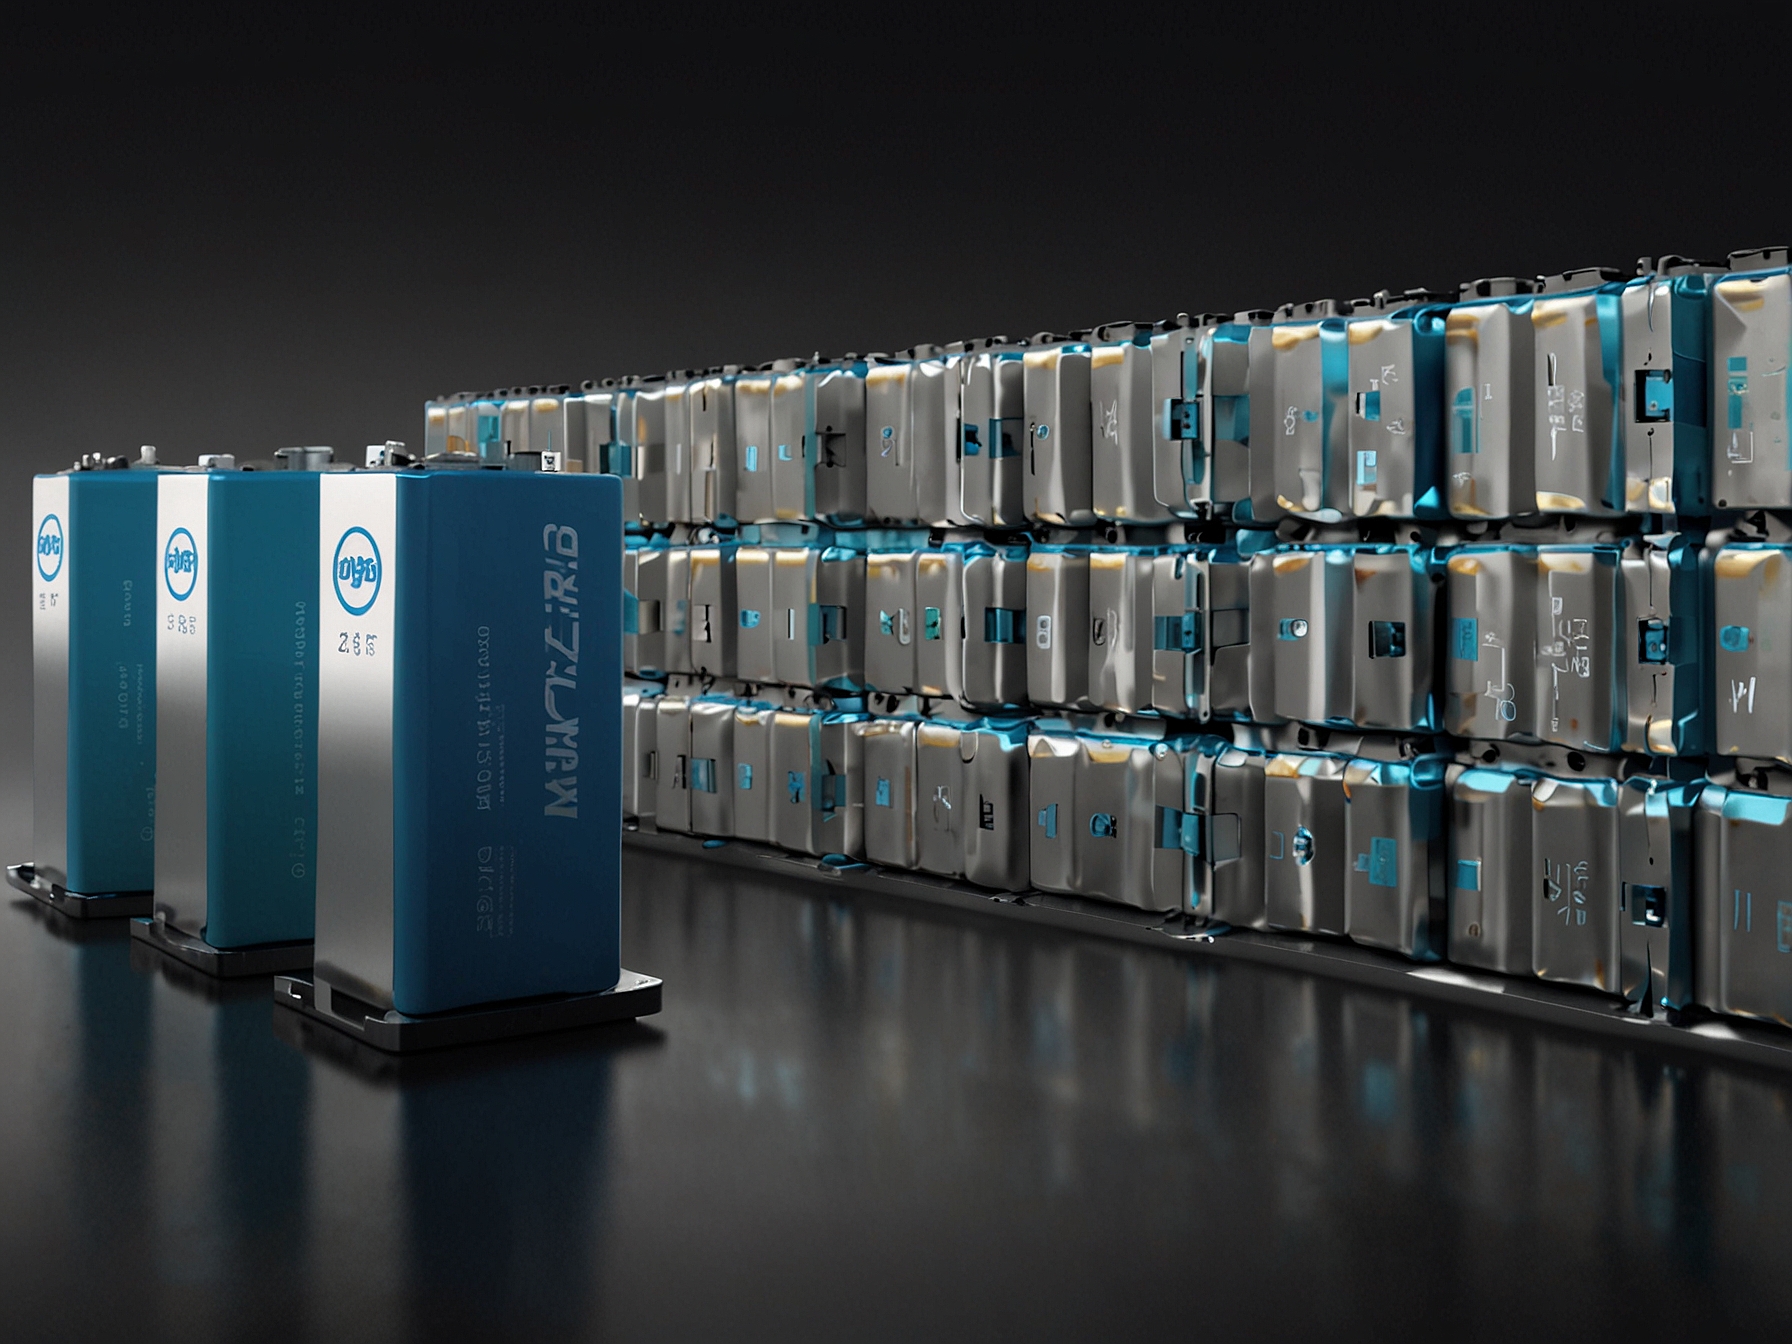 An array of cutting-edge EV batteries, including BYD's Blade Battery and NIO's swappable batteries, illustrating China's advances in battery technology and innovation.